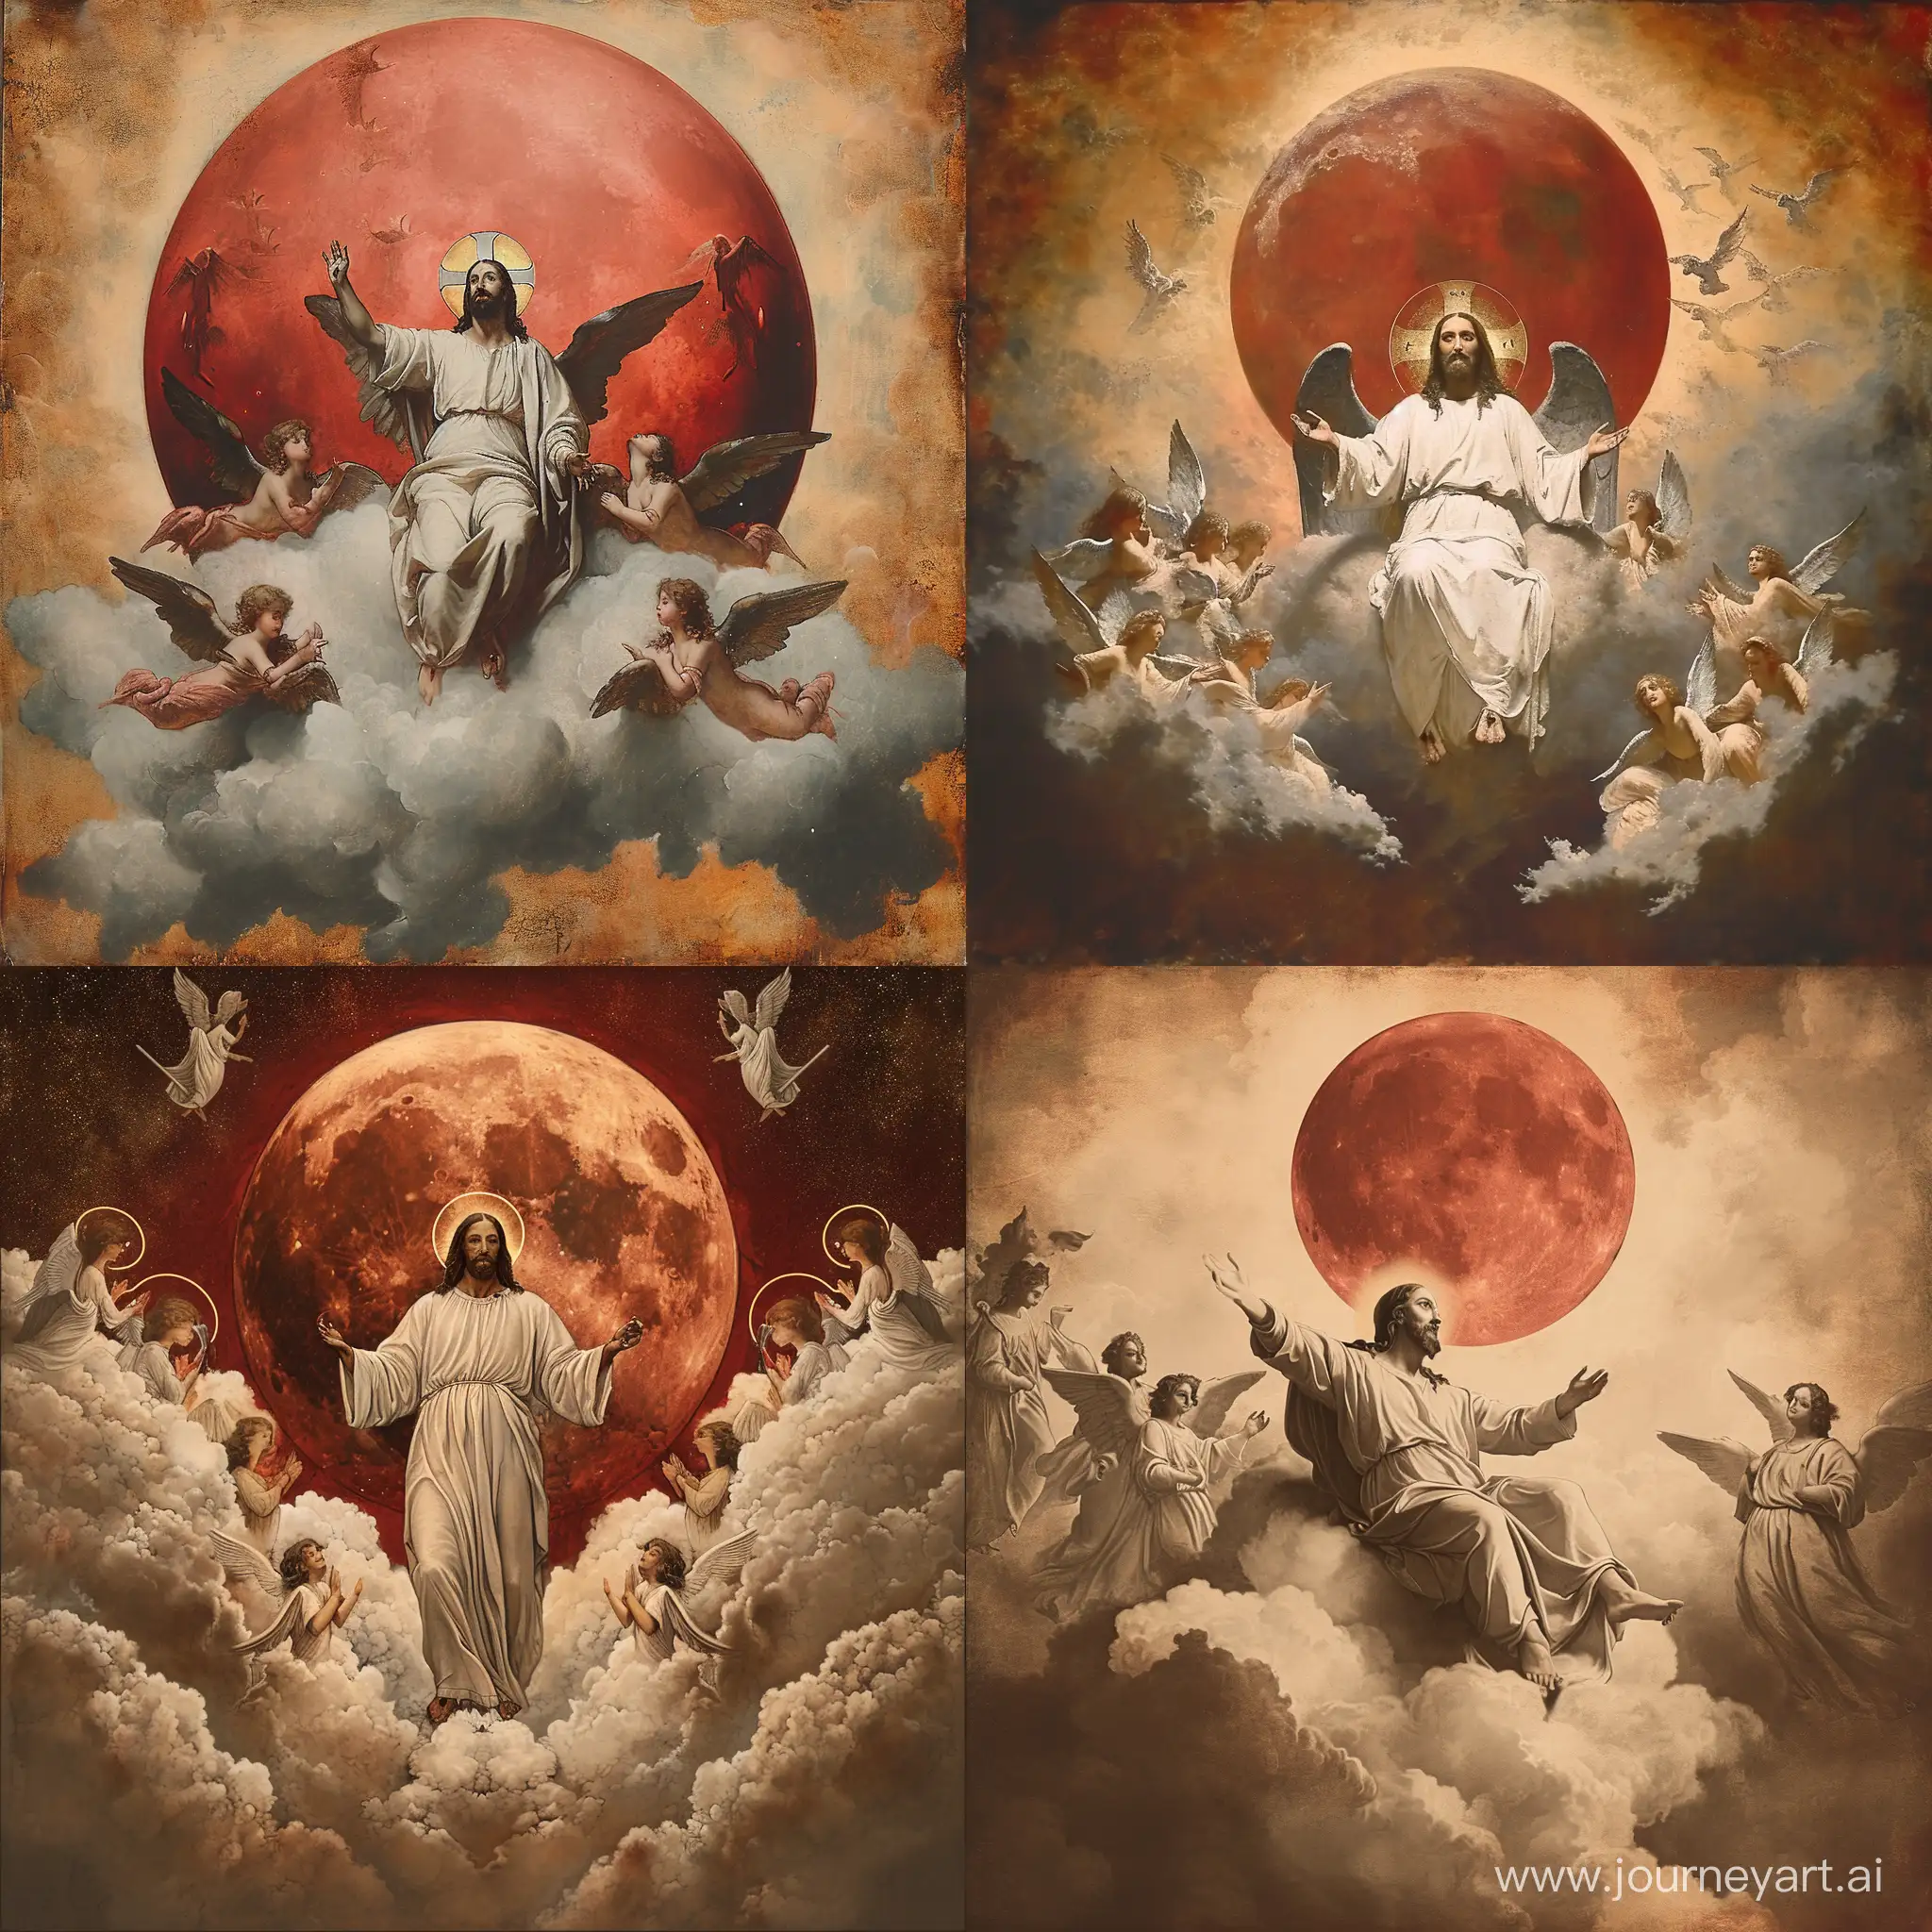 Divine-Presence-Jesus-Christ-in-the-Clouds-with-Angels-and-a-Red-Moon